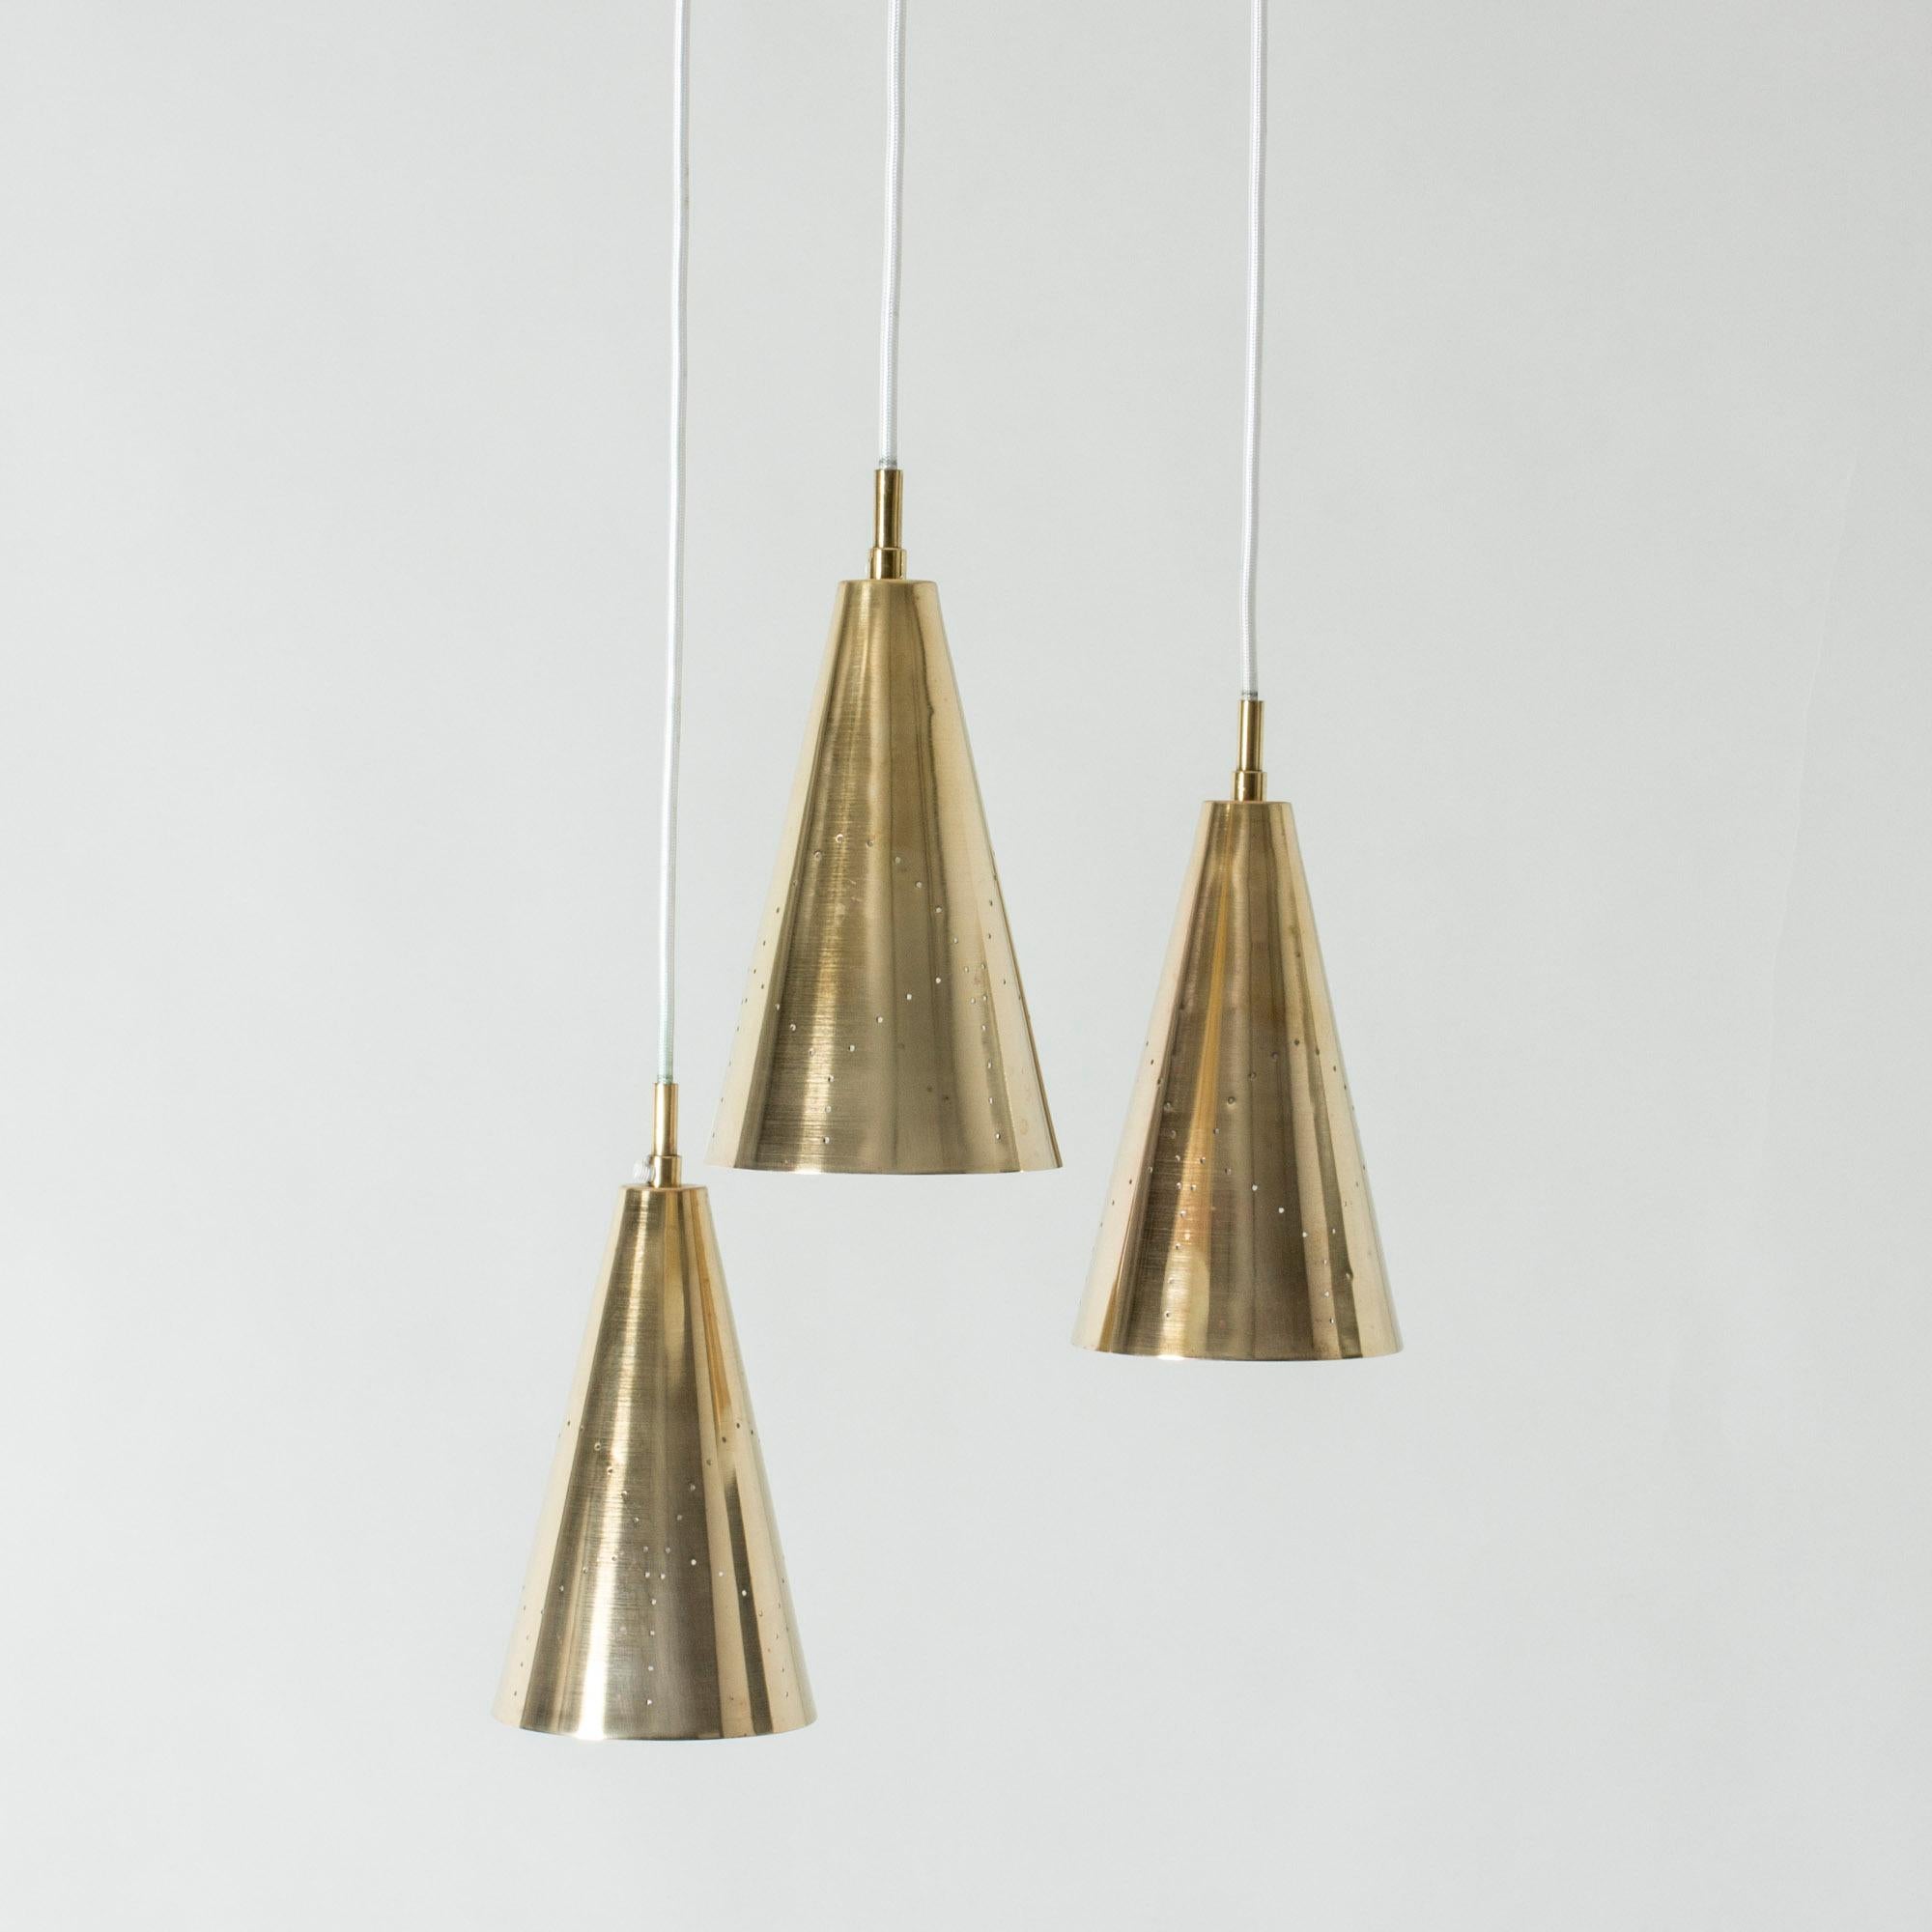 Swedish Rare Brass Ceiling Lamp by Hans-Agne Jakobson, Sweden, 1950s For Sale